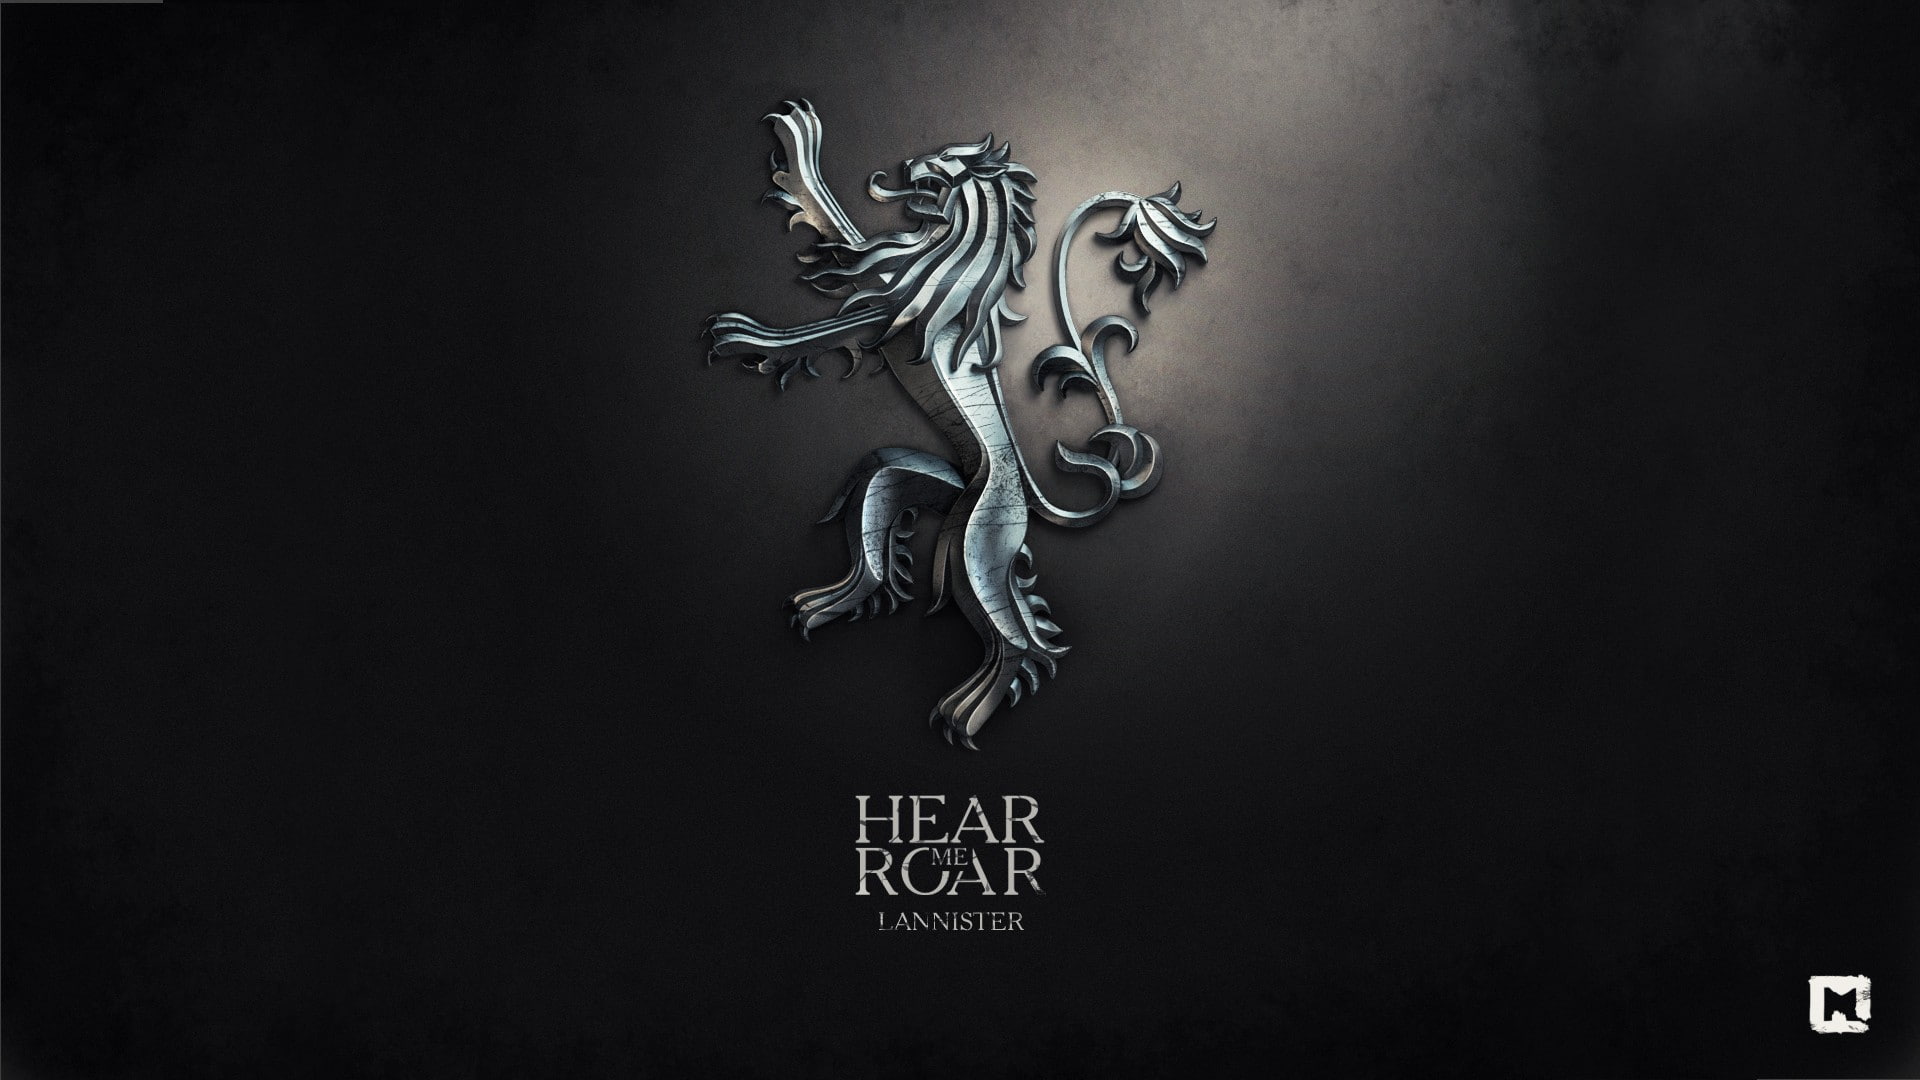 digital art, sigils, A Song of Ice and Fire, House Lannister